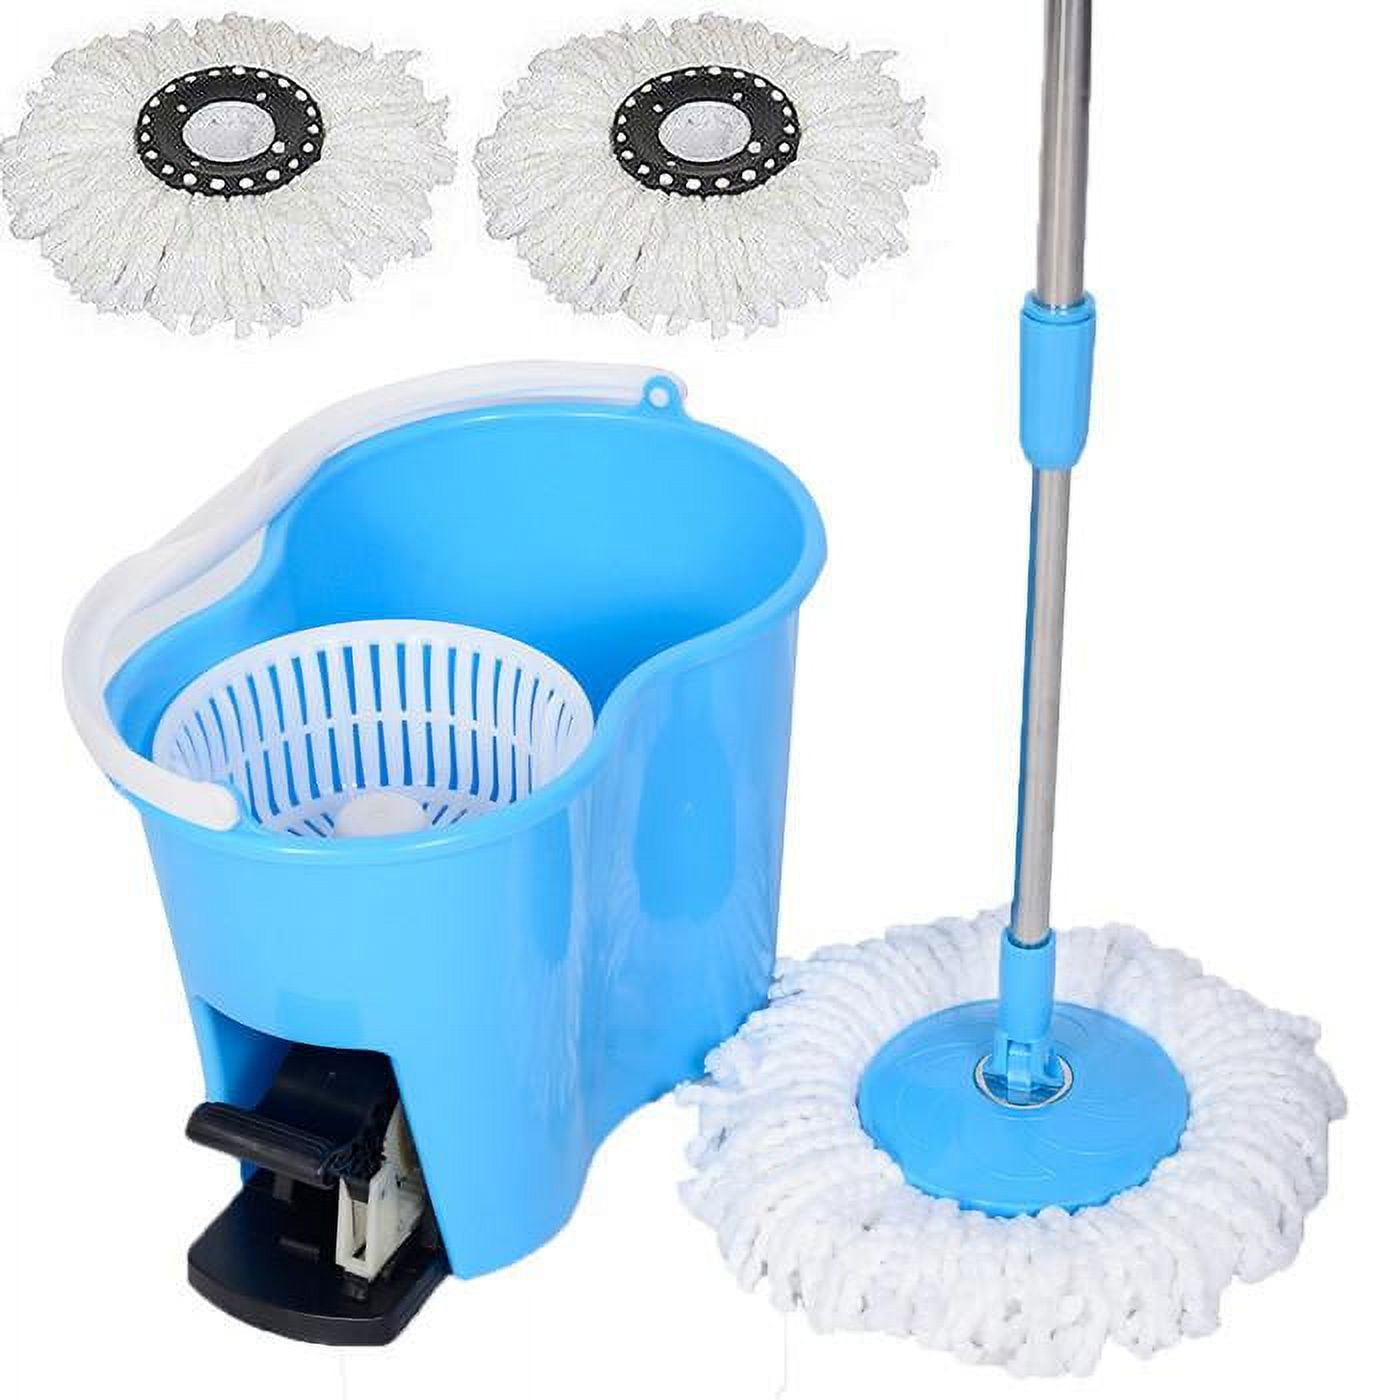 Spinning mop. Швабра Spin Mop 360. Clean Water Spin Mop швабра. RZ-618 швабра-лентяйка Smart Spin Mop 360* (cиняя). Швабра - лентяйка Spin Mop.